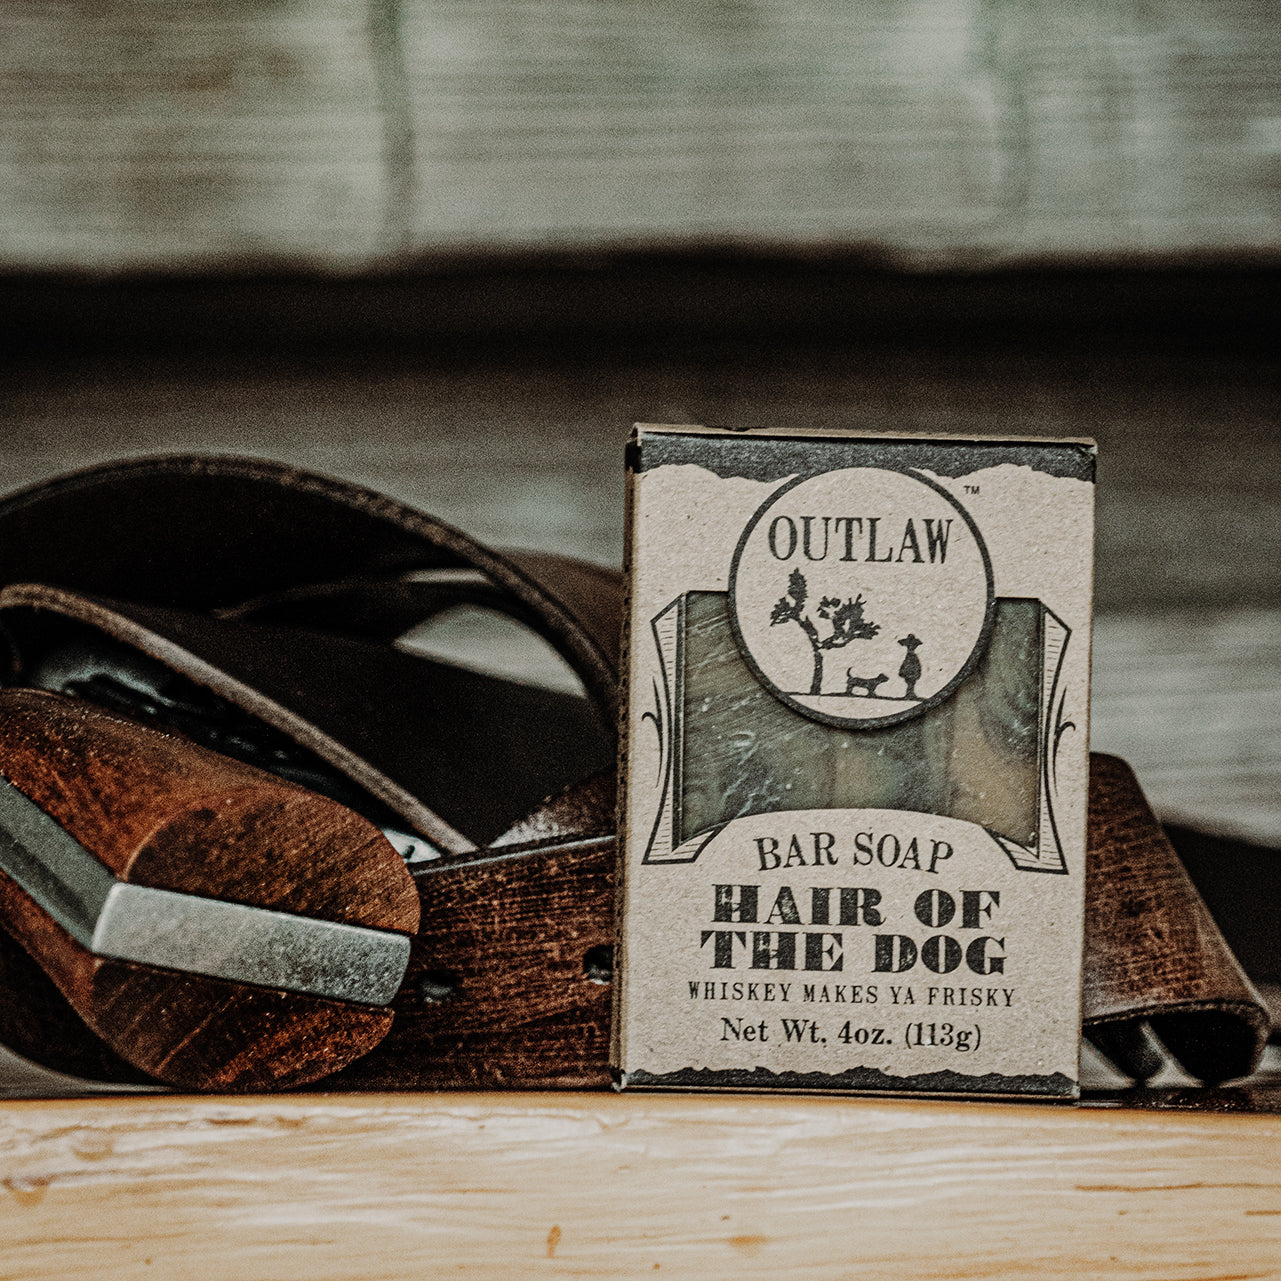 Hair of the Dog whiskey handmade soap for men and women by Outlaw